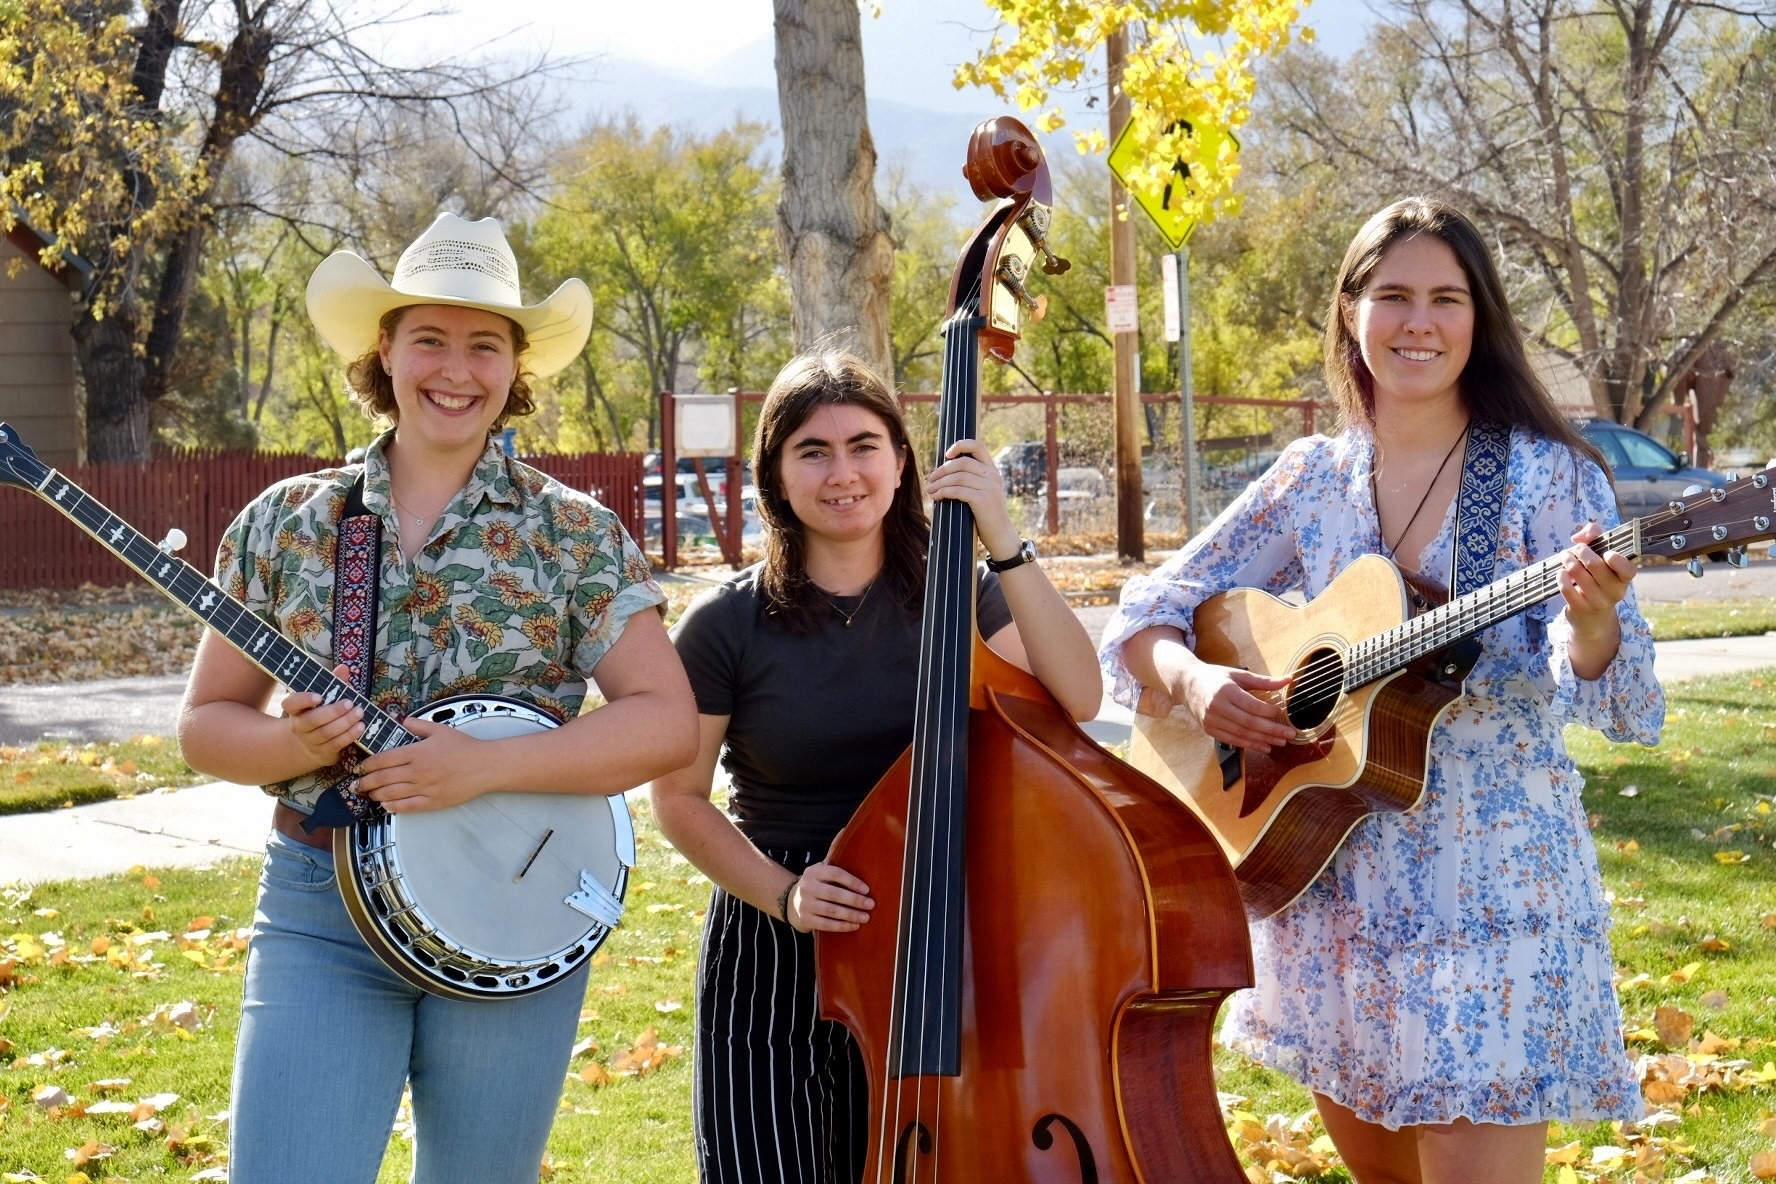 One of the Bluegrass program's upper-tier ensembles for the 2022-23 academic year is The Tumbleweeds. From left: Naomi Pryzant, Lucy Capone, Maren Snow.